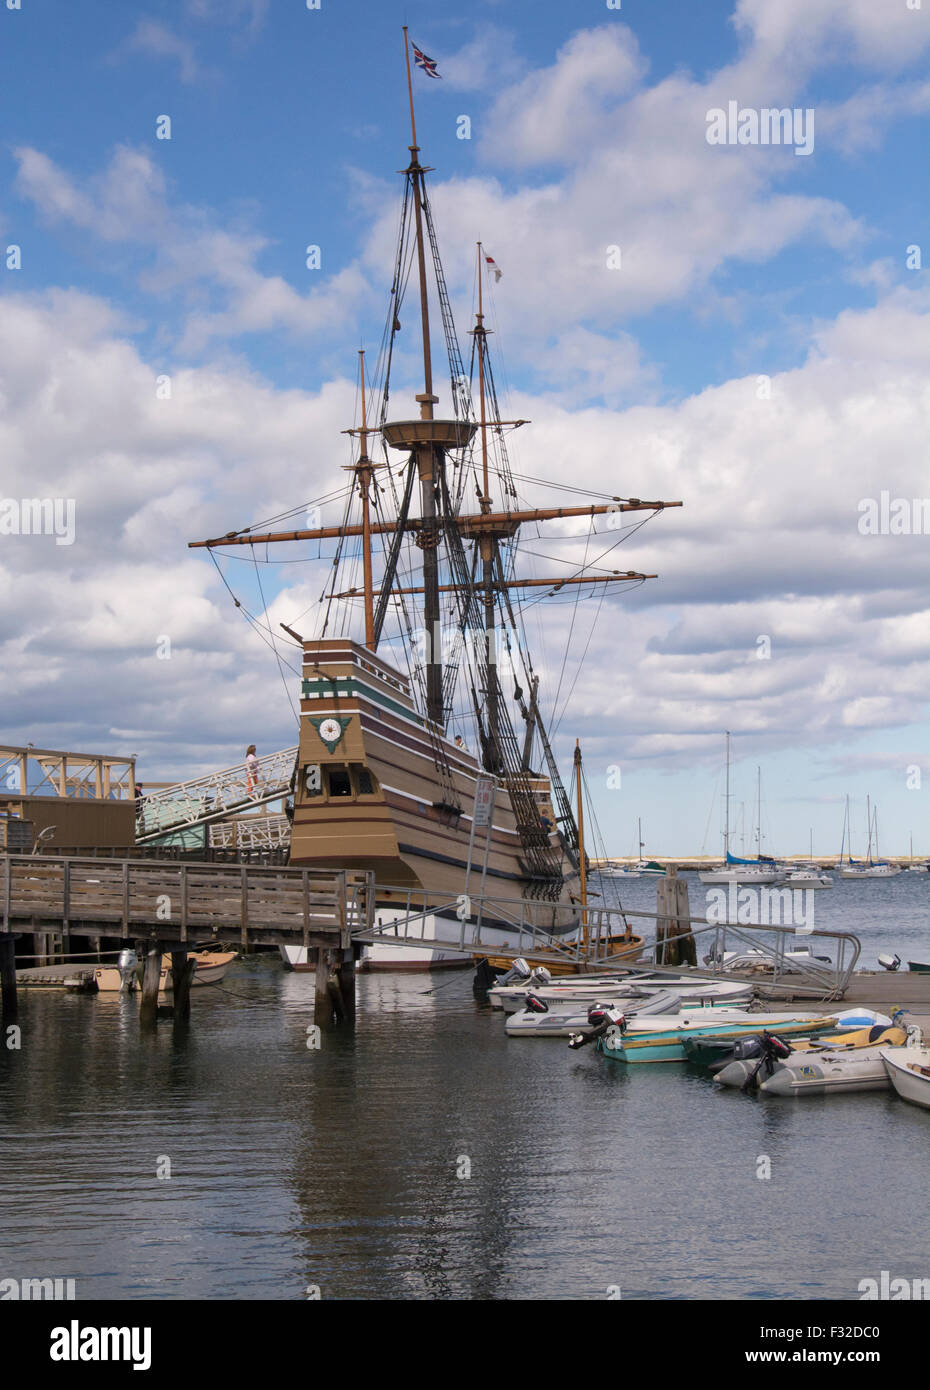 Mayflower II in Plymouth harbor, Massachusetts. The ship is a replica of the original Mayflower, and was built 1955-57. Stock Photo